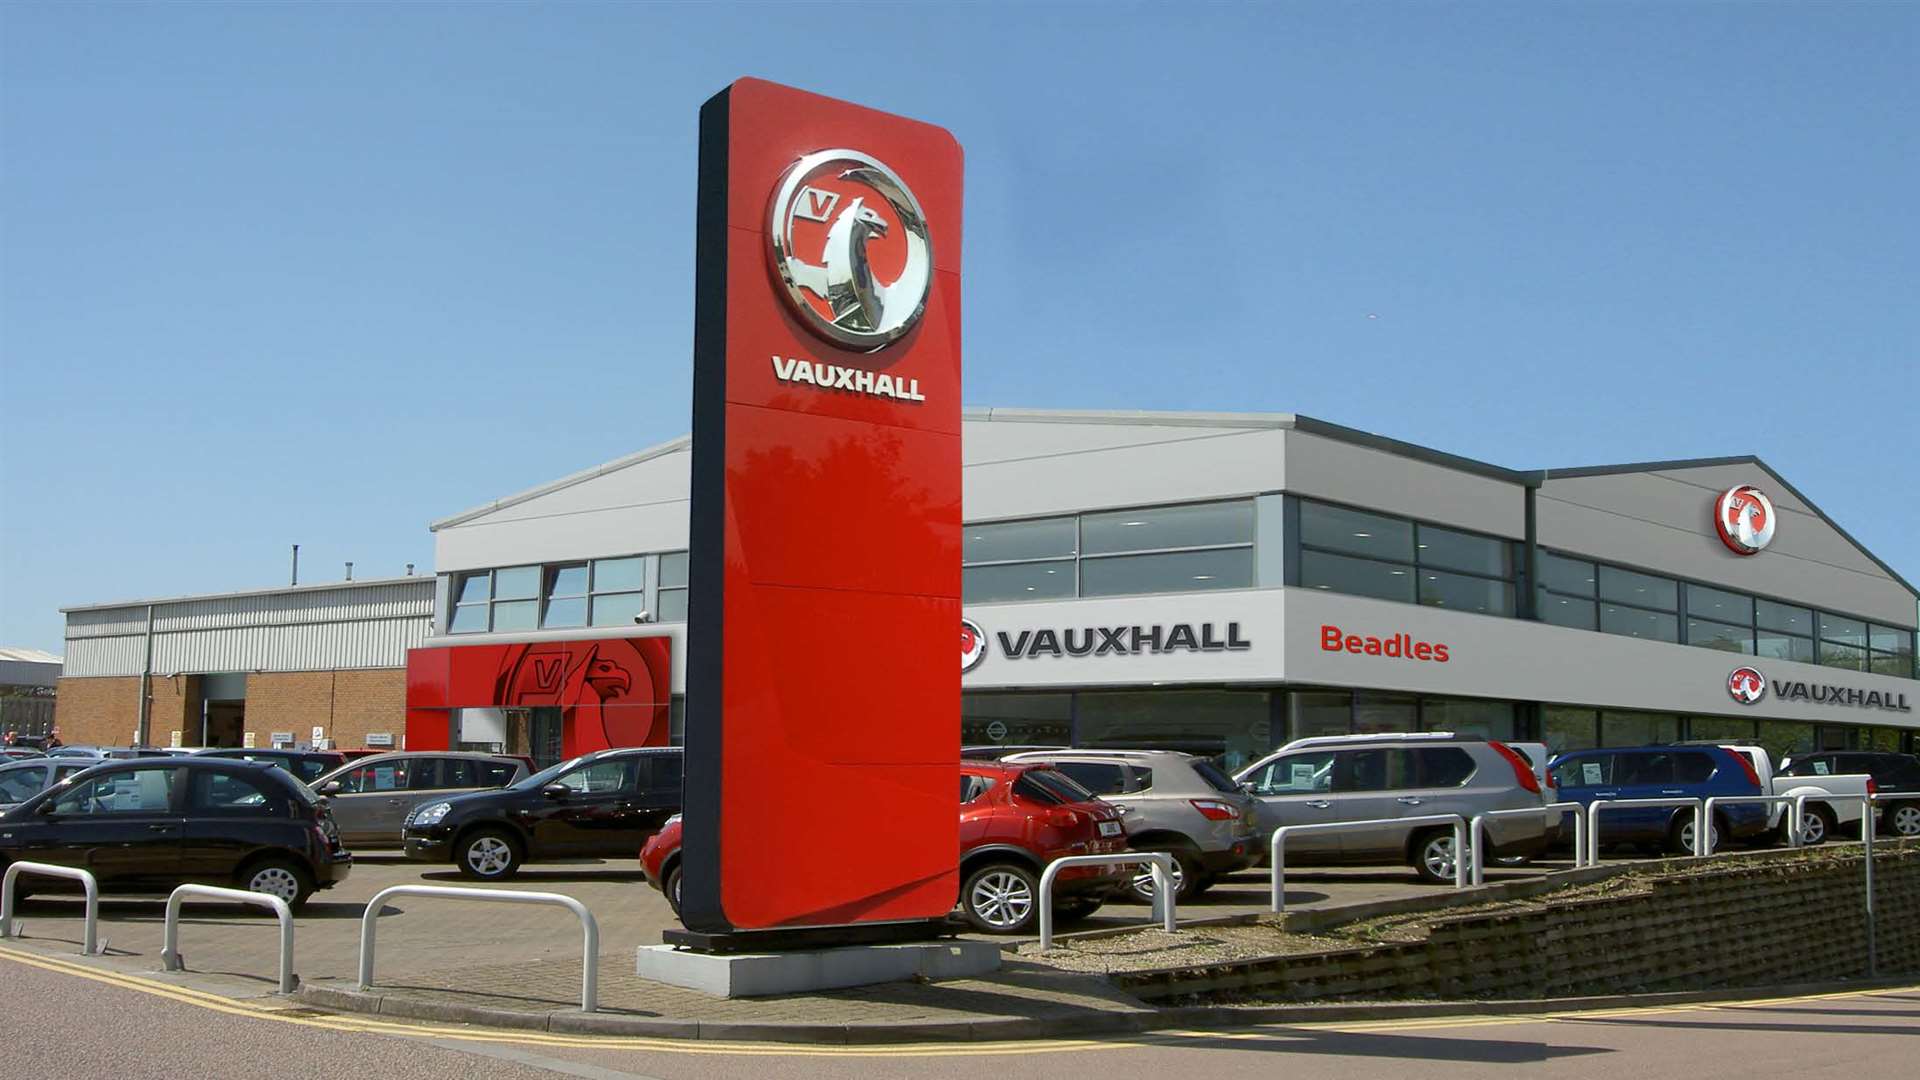 Beadles opens Vauxhall dealership at Aylesford on July 13